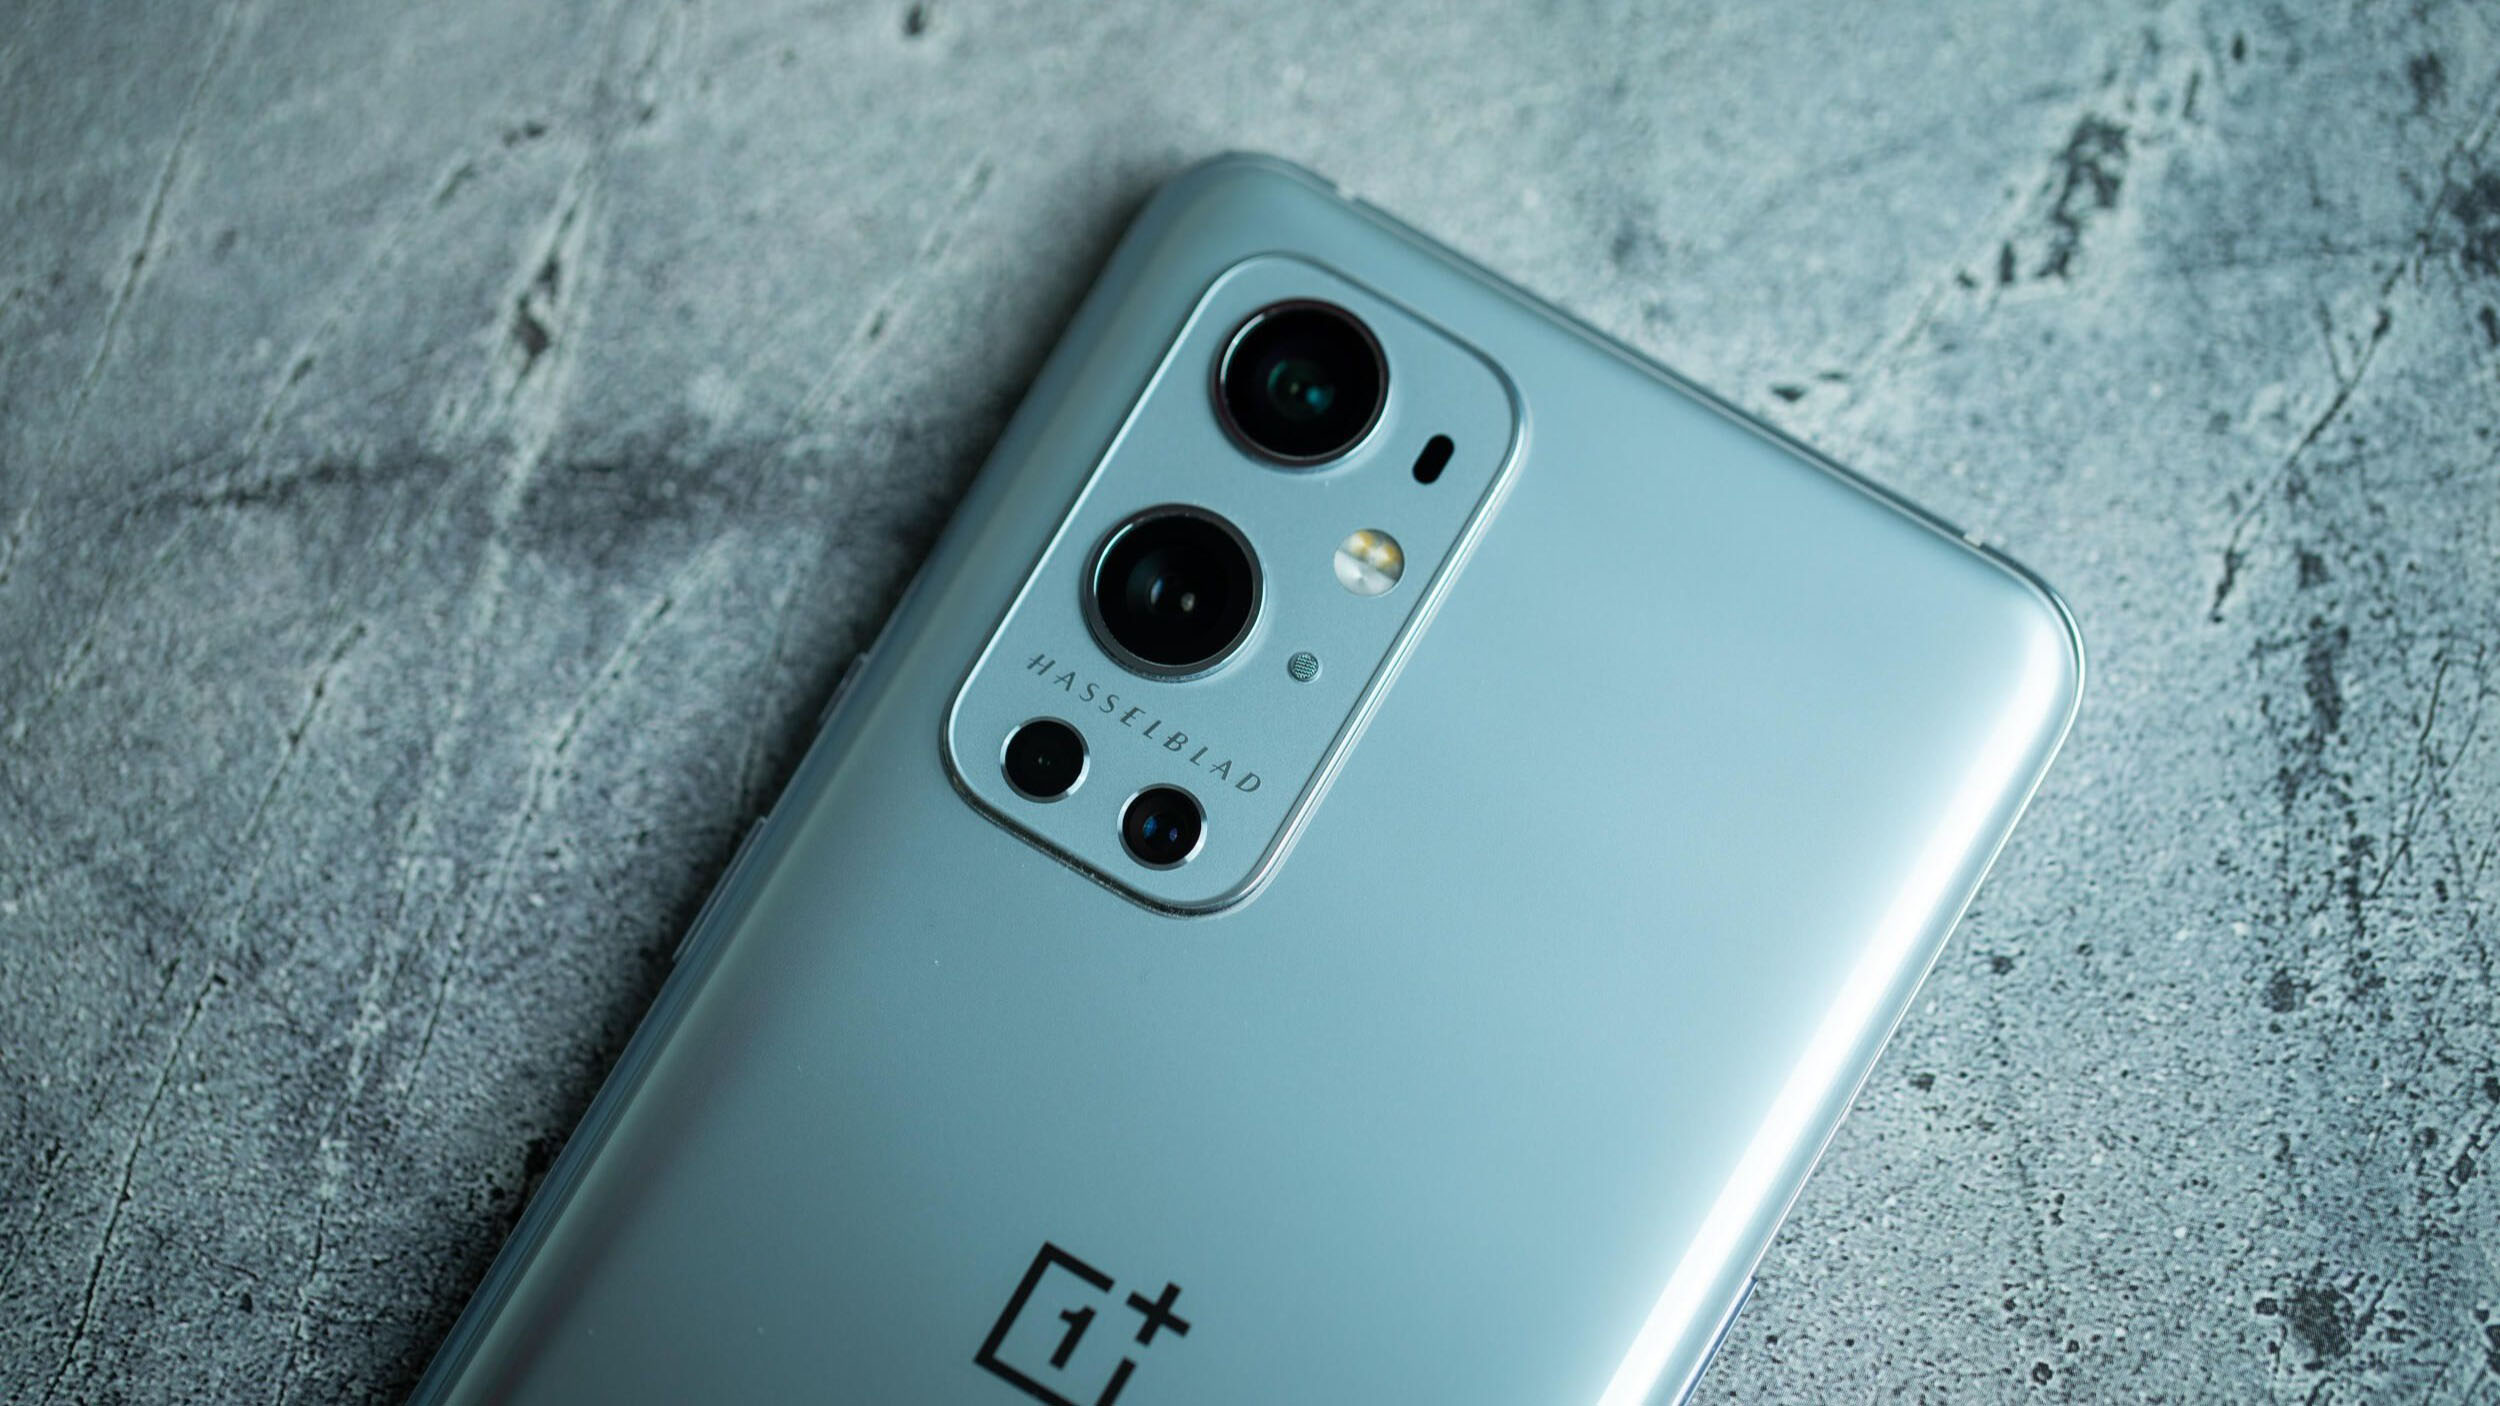 The OnePlus 9 and 9 Pro are Android-based smartphones manufactured by OnePlus, unveiled on March 23, 2021. The phones feature upgraded cameras in part...